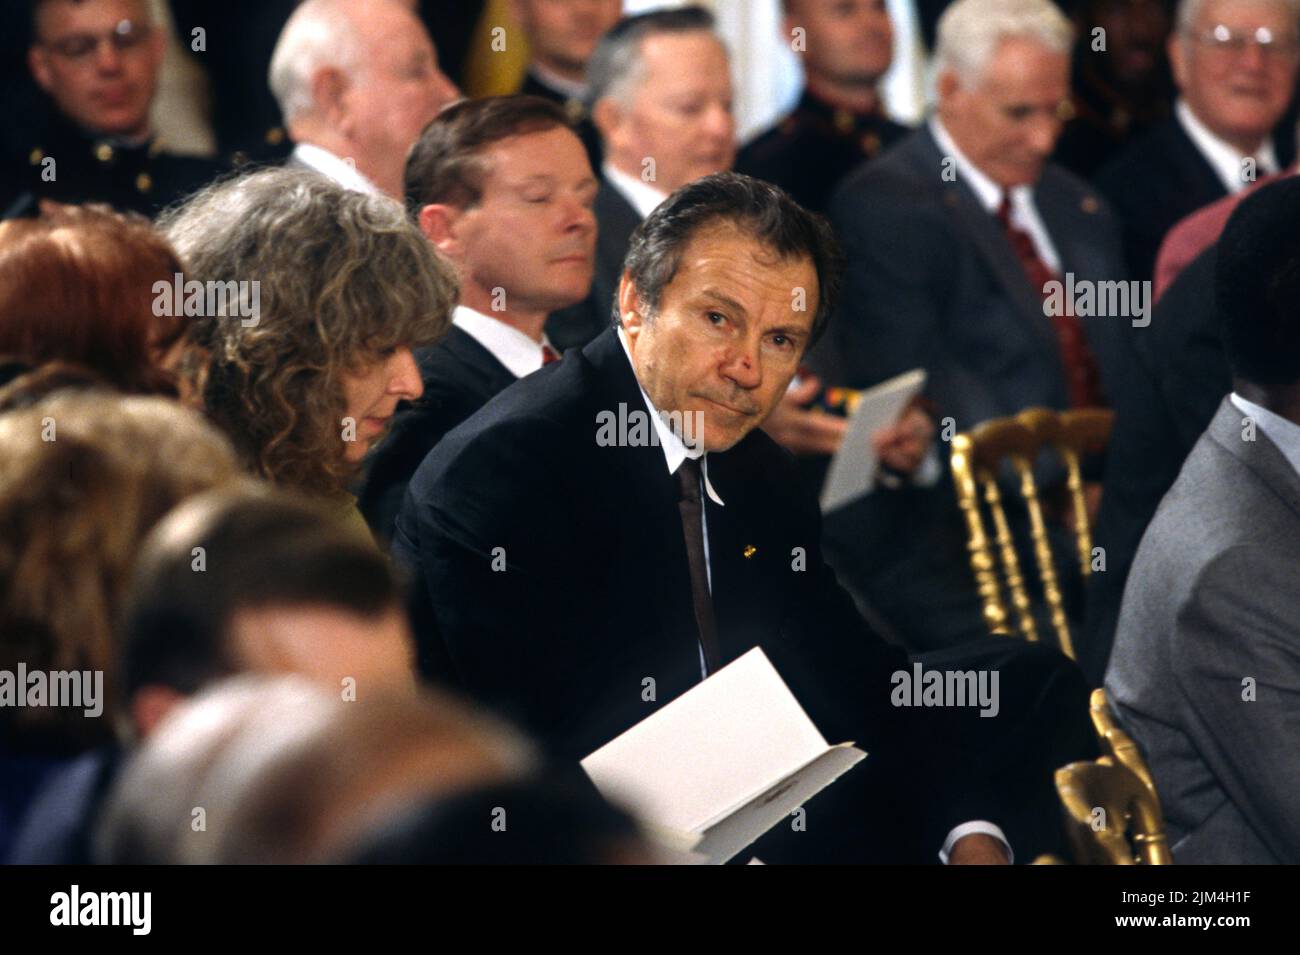 American actor Harvey Keitel, with bruises on his face, attends the Medal Honor presentation to retired Marine Major General James L. Day, in the East Room of the White House, January 20, 1998 in Washington, D.C. Stock Photo